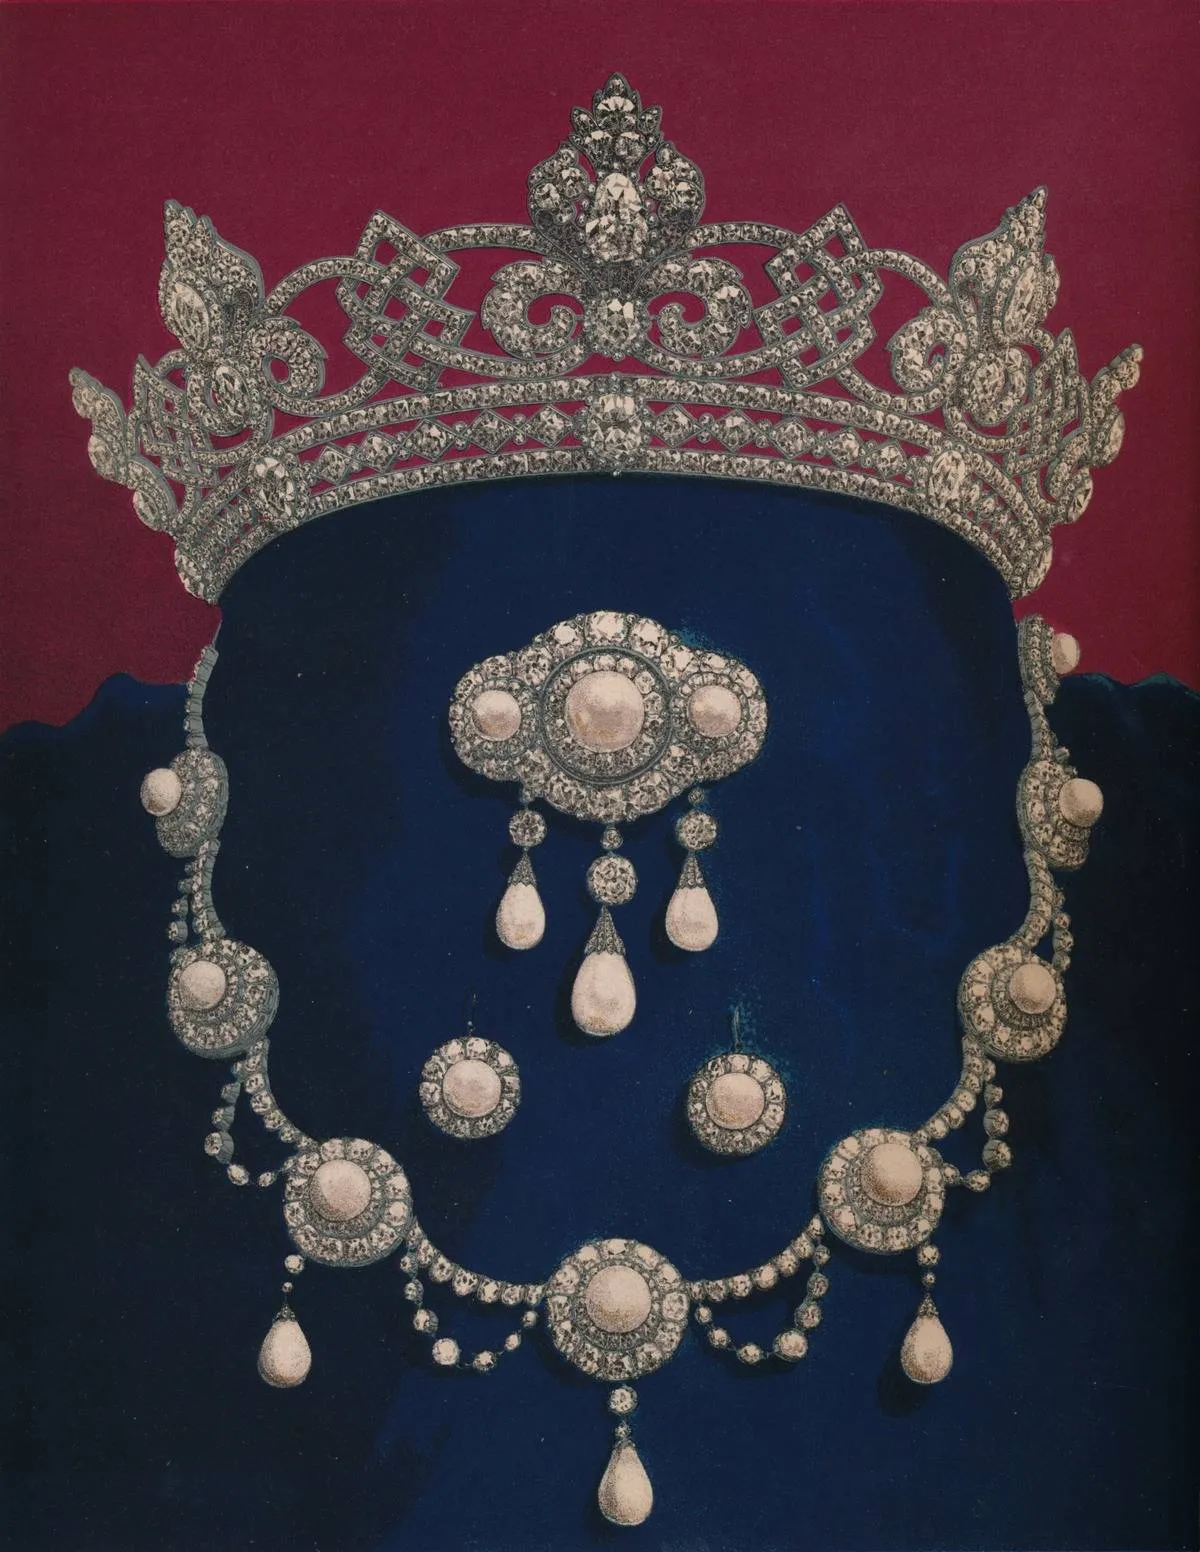 <p>Princess Alexandra of Denmark received this necklace as a gift on the eve of her wedding in 1863. </p> <p>The jewelry is now known as <a href="https://www.thecourtjeweller.com/2020/05/the-nightly-necklace-queen-alexandras-3.html" rel="noopener noreferrer">Queen Alexandra's Wedding Necklace</a>, and it was eventually passed down to the Queen Mother and later to Queen Elizabeth II. </p> <p><a href="https://www.msn.com/en-us/community/channel/vid-u7q3kmpdkkkxhftb08rpv9p5r4sxwvipuqisdevjrvyf4v9cfj9s?item=flights%3Aprg-tipsubsc-v1a&ocid=windirect&cvid=1421b7fe40e24eb3b4cd0fb4d74b5e2c" rel="noopener noreferrer">Follow our brand to see more like this</a></p>